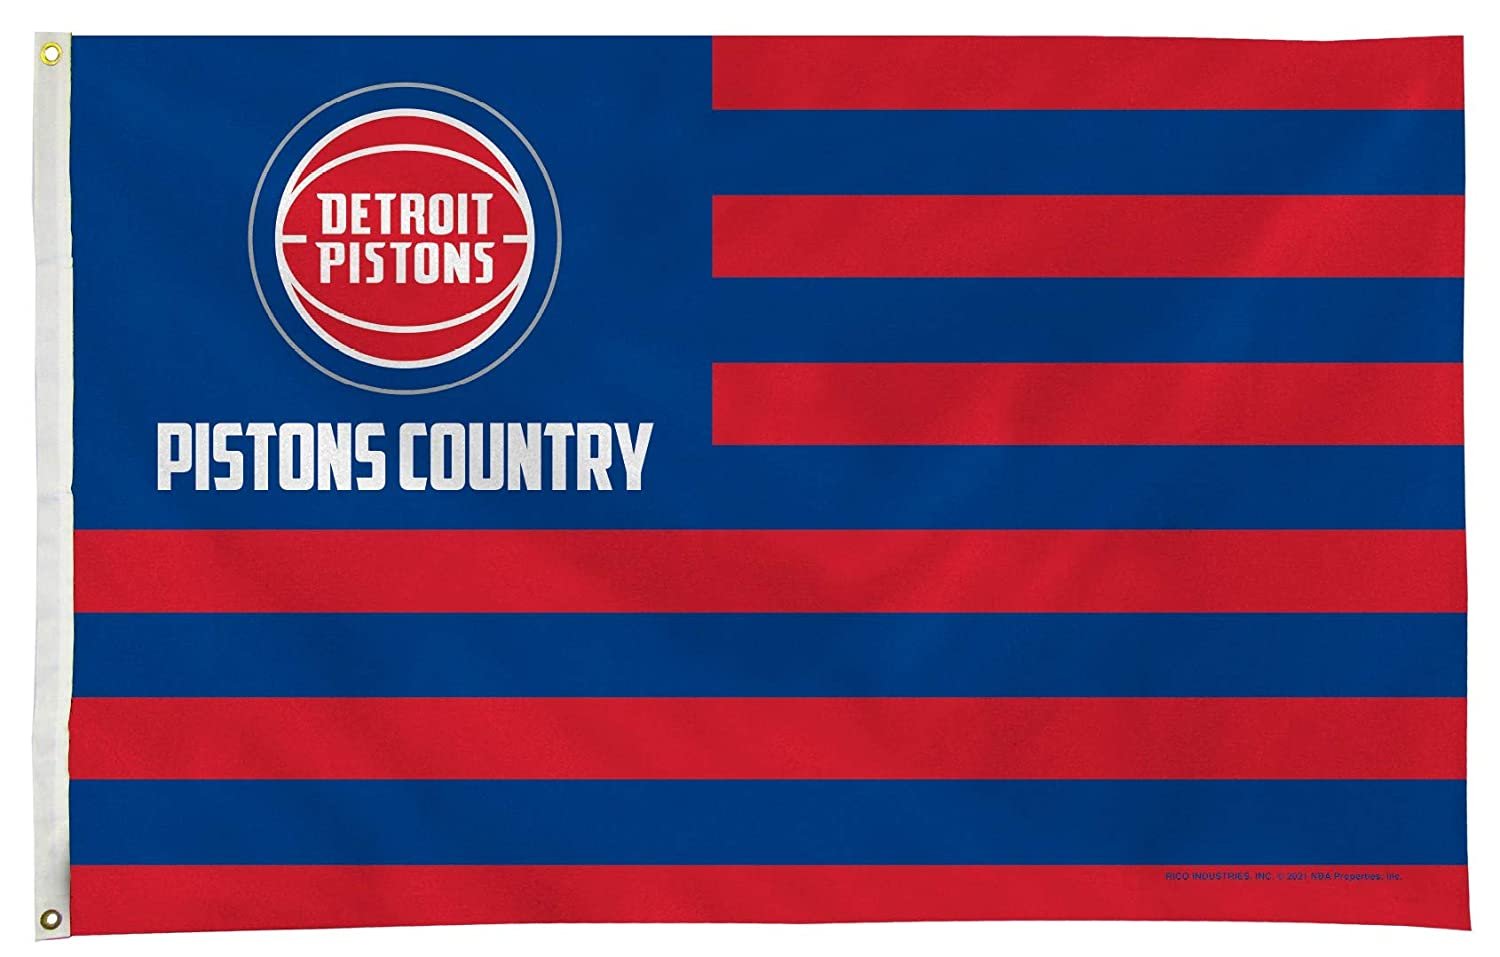 Detroit Pistons Premium 3x5 Feet Flag Banner, Country Design, Metal Grommets, Outdoor Use, Single Sided